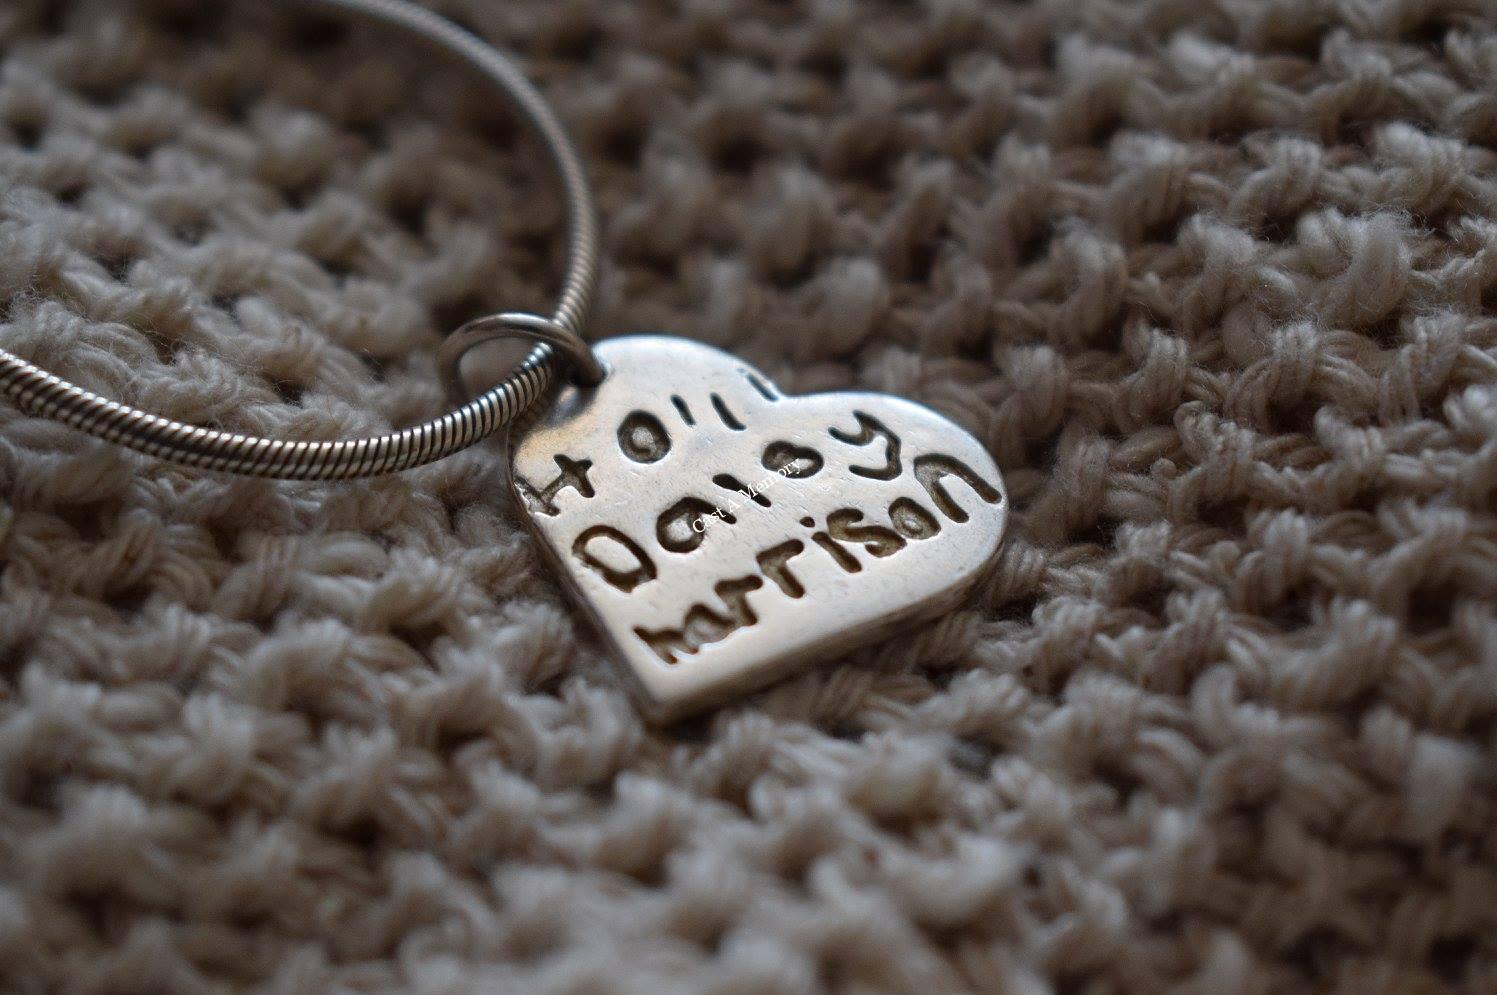 childrens name inscribed on a silver necklace charm